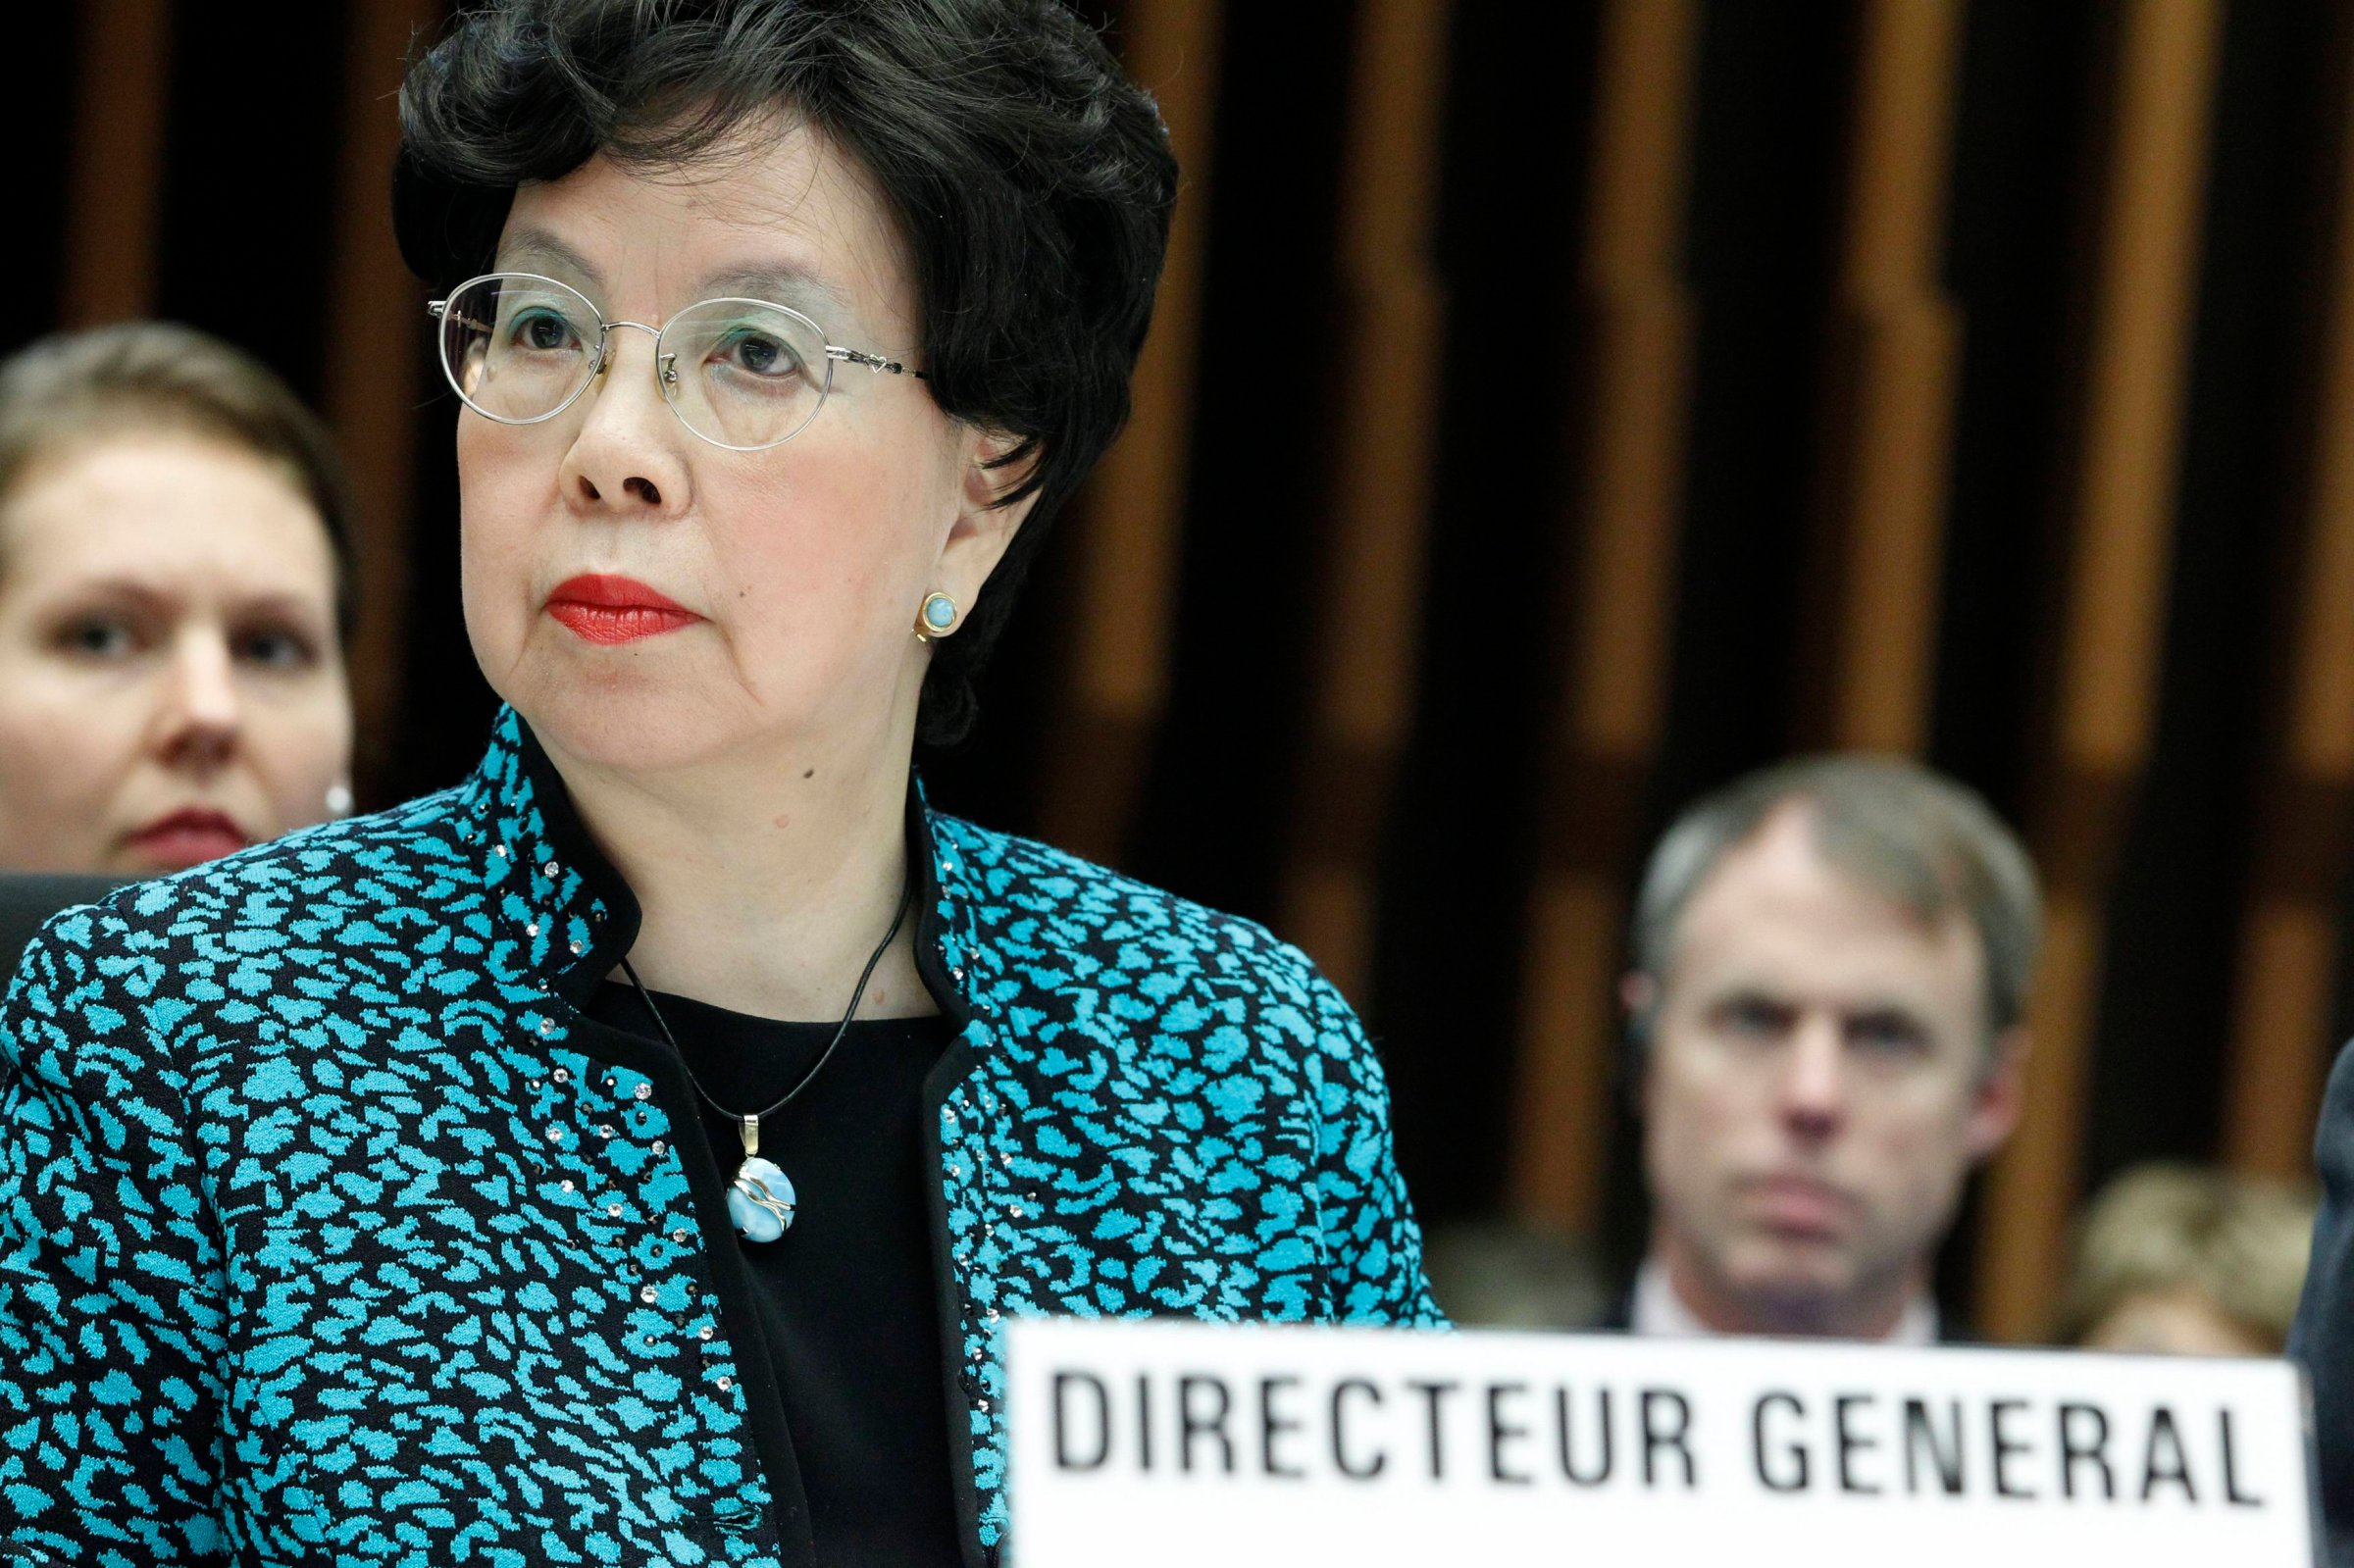 WHO Director-General Margaret Chan addresses the media during a special meeting on Ebola at the WHO headquarters in Geneva